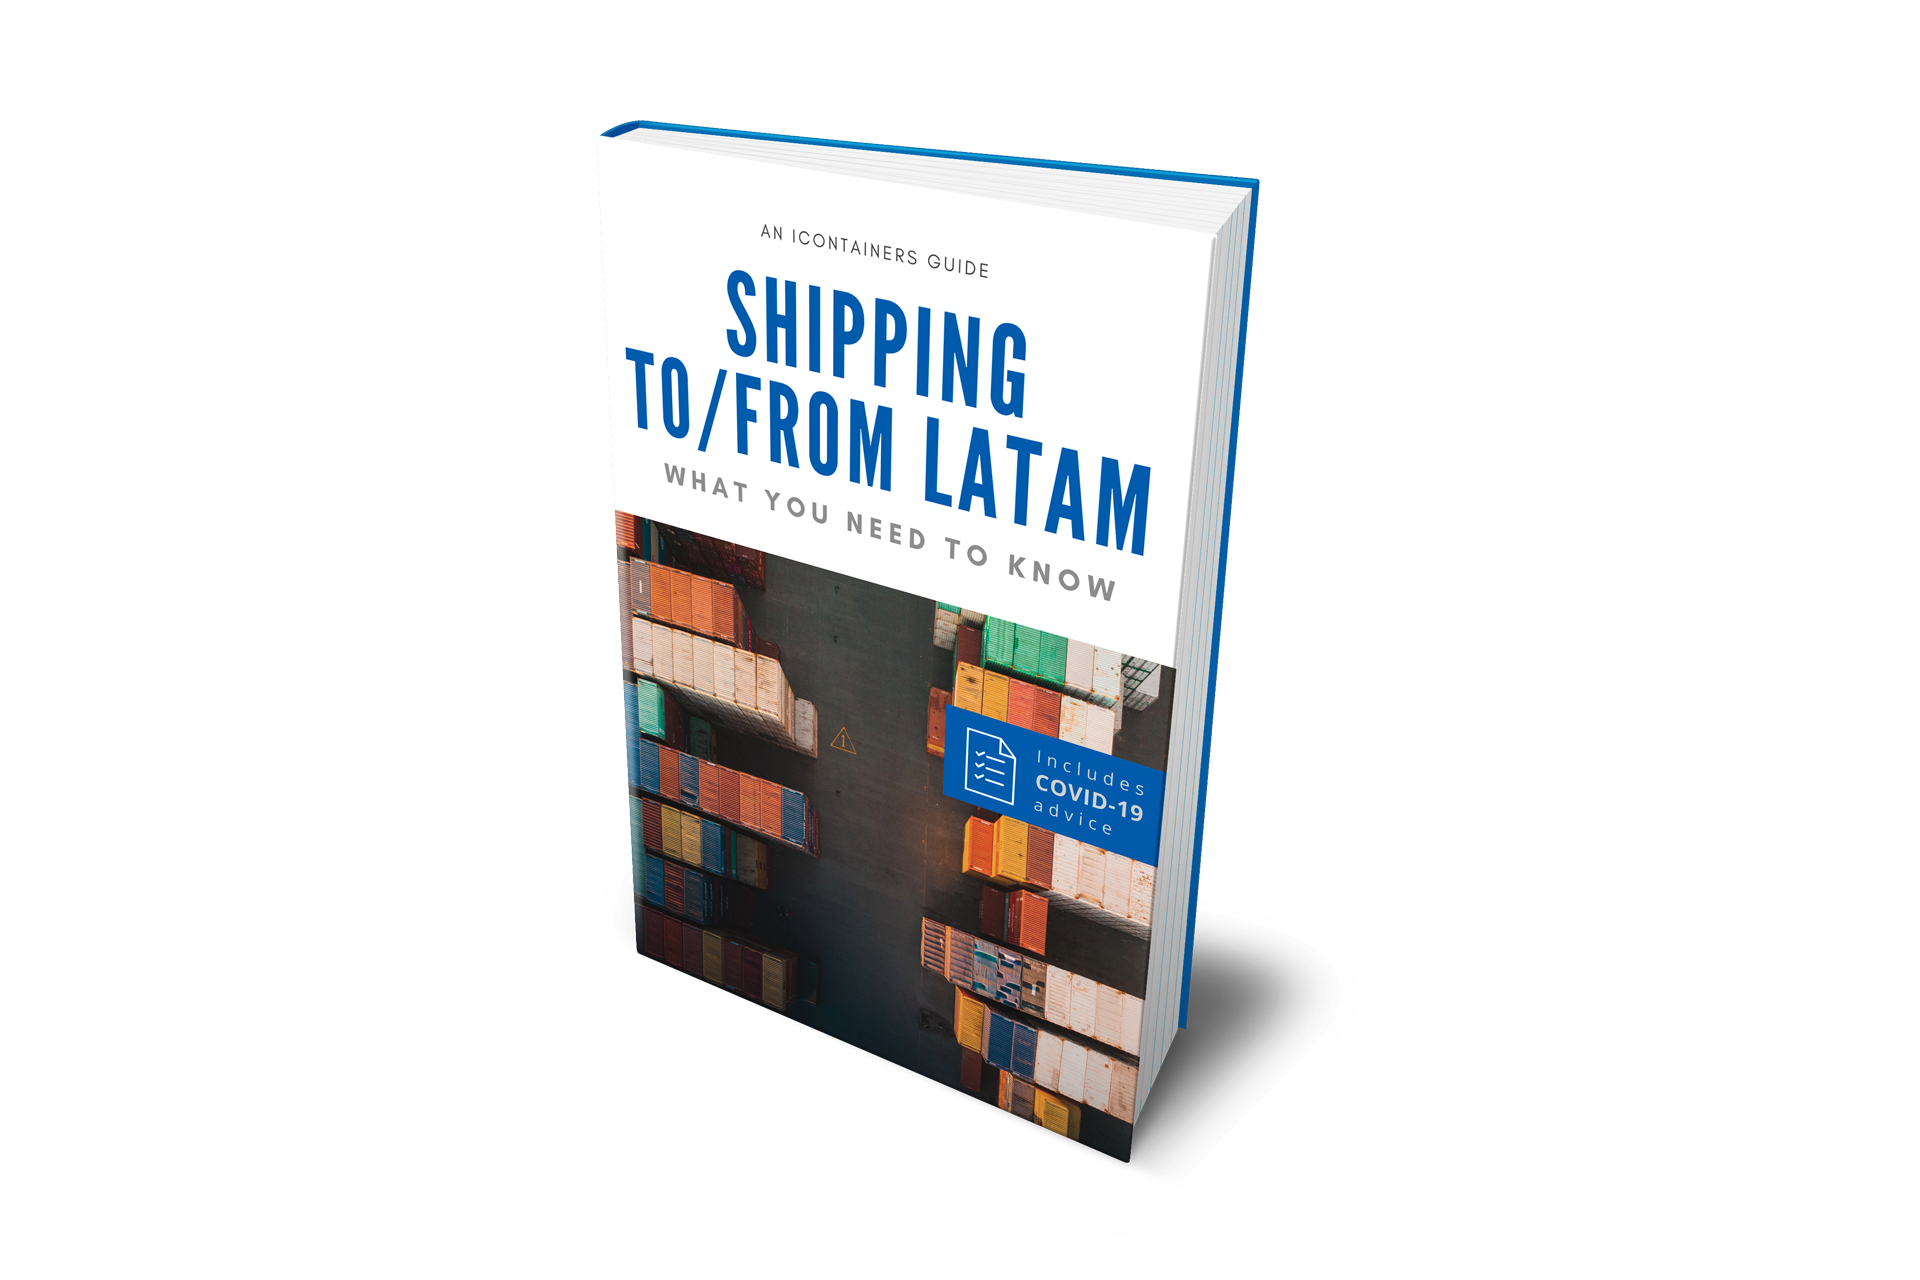 Your guide to shipping to and from Latin America